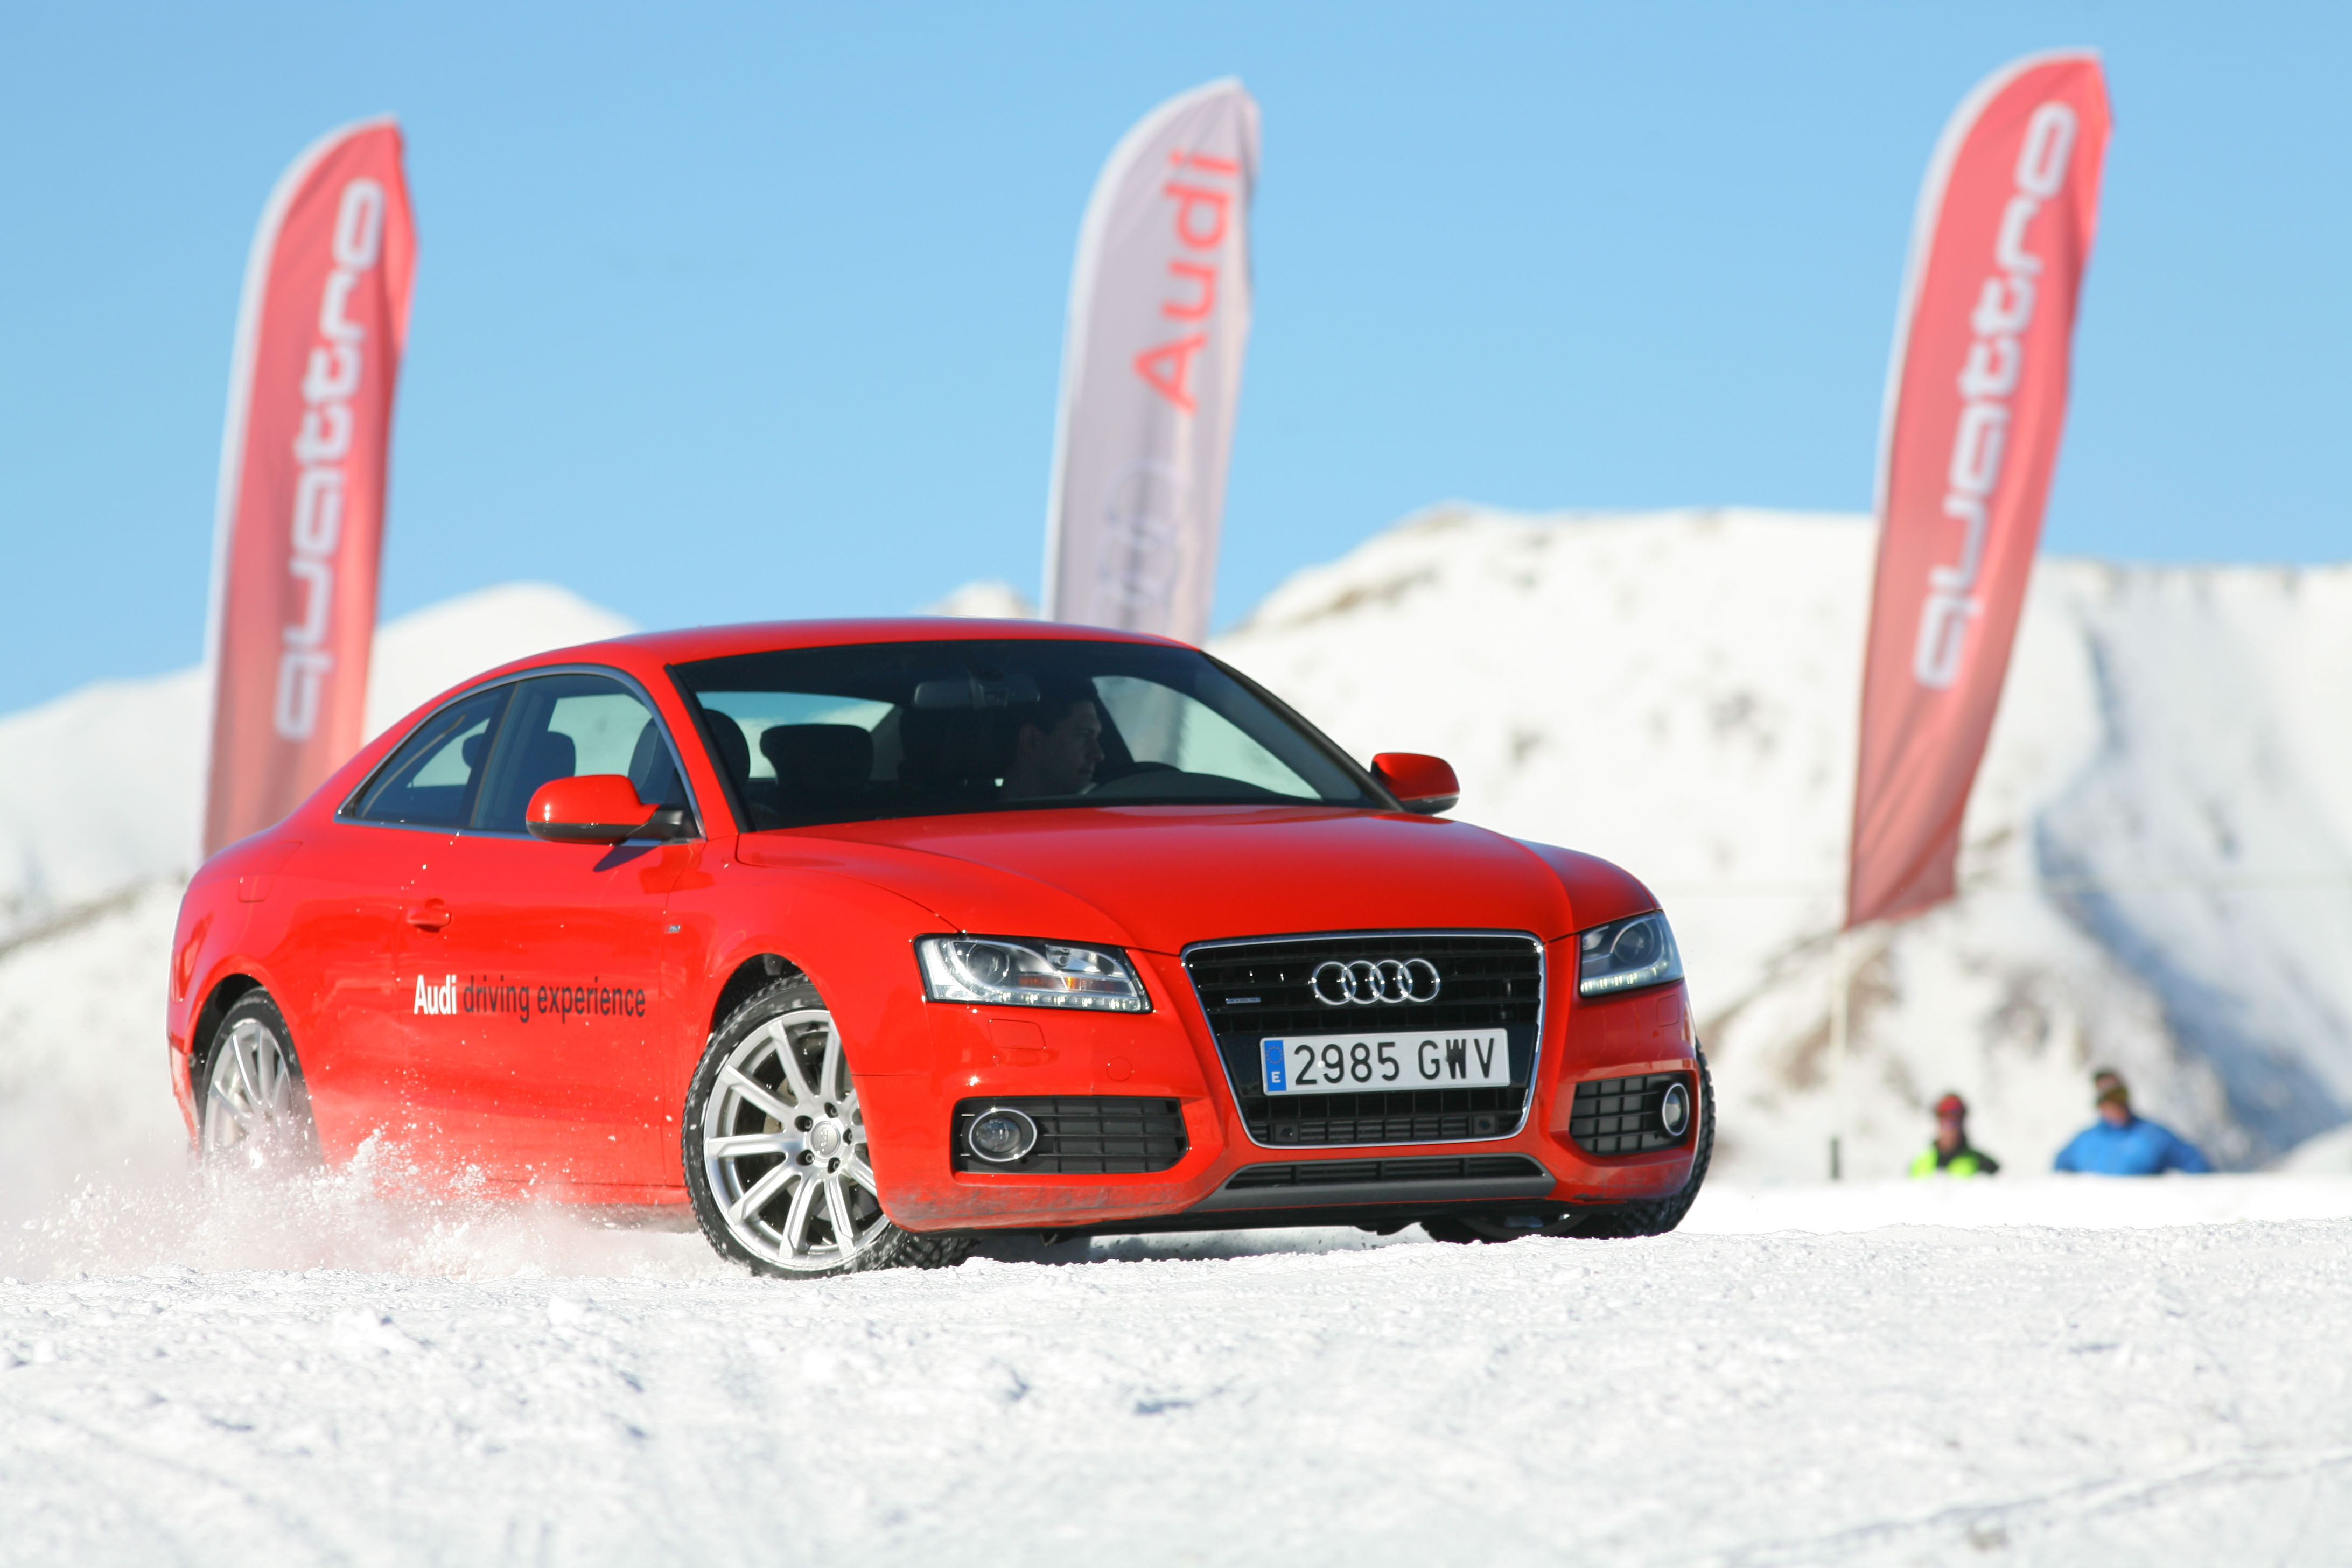 Audi winter driving experience2G